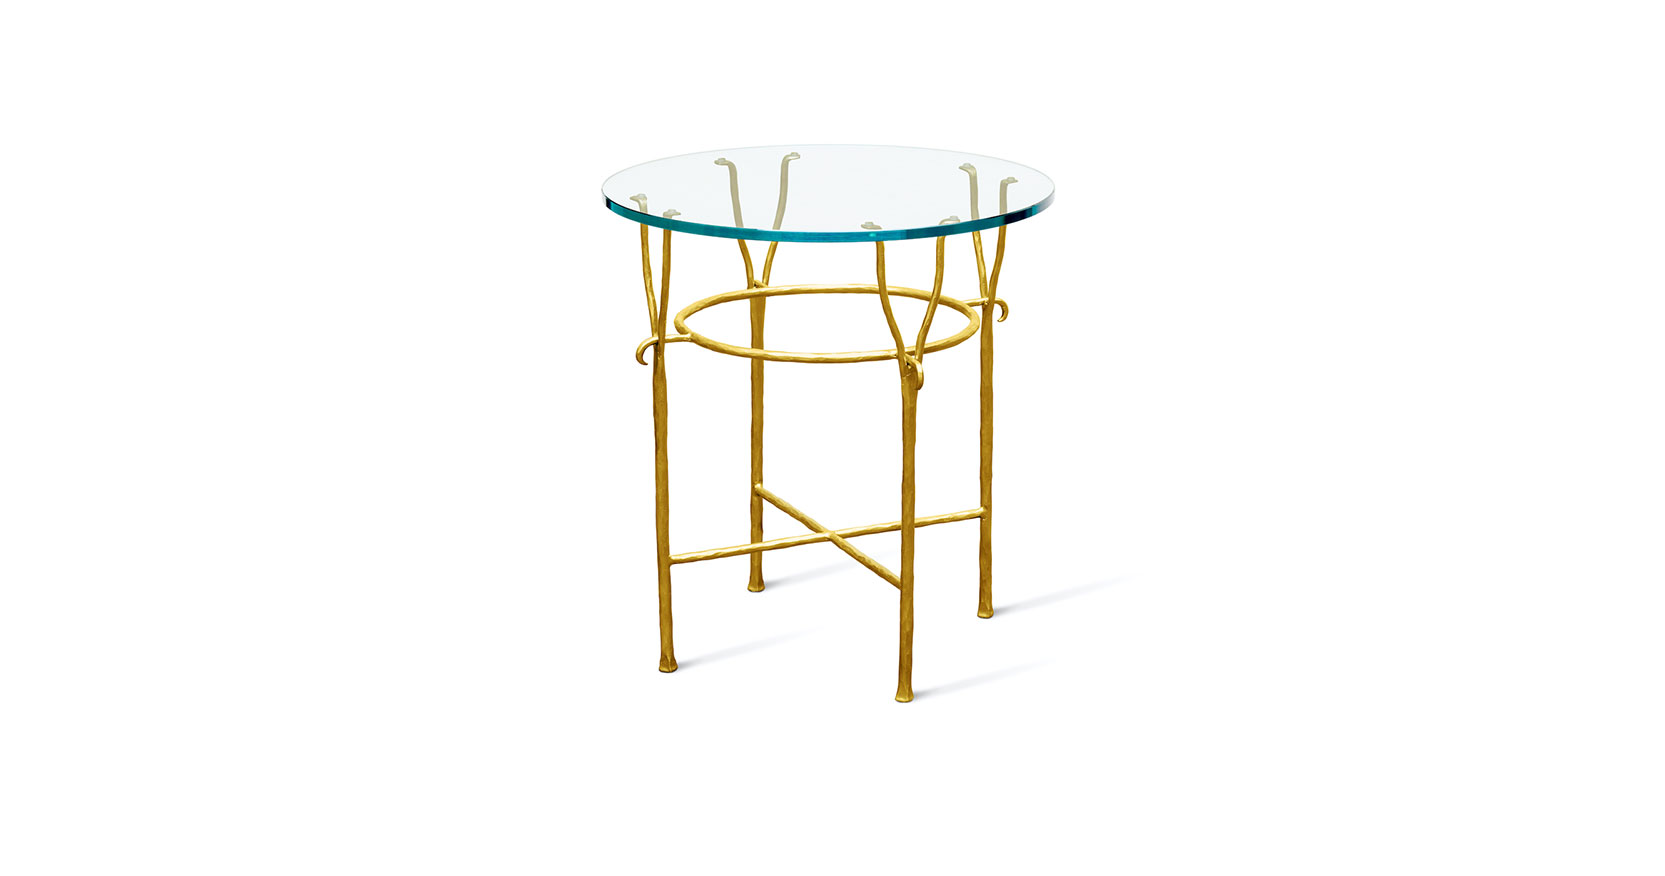 Garouste Bonetti, round side table forks. Top in glass, structure in hand wrought entirely gilded iron with the feet forked at the top to support the glass